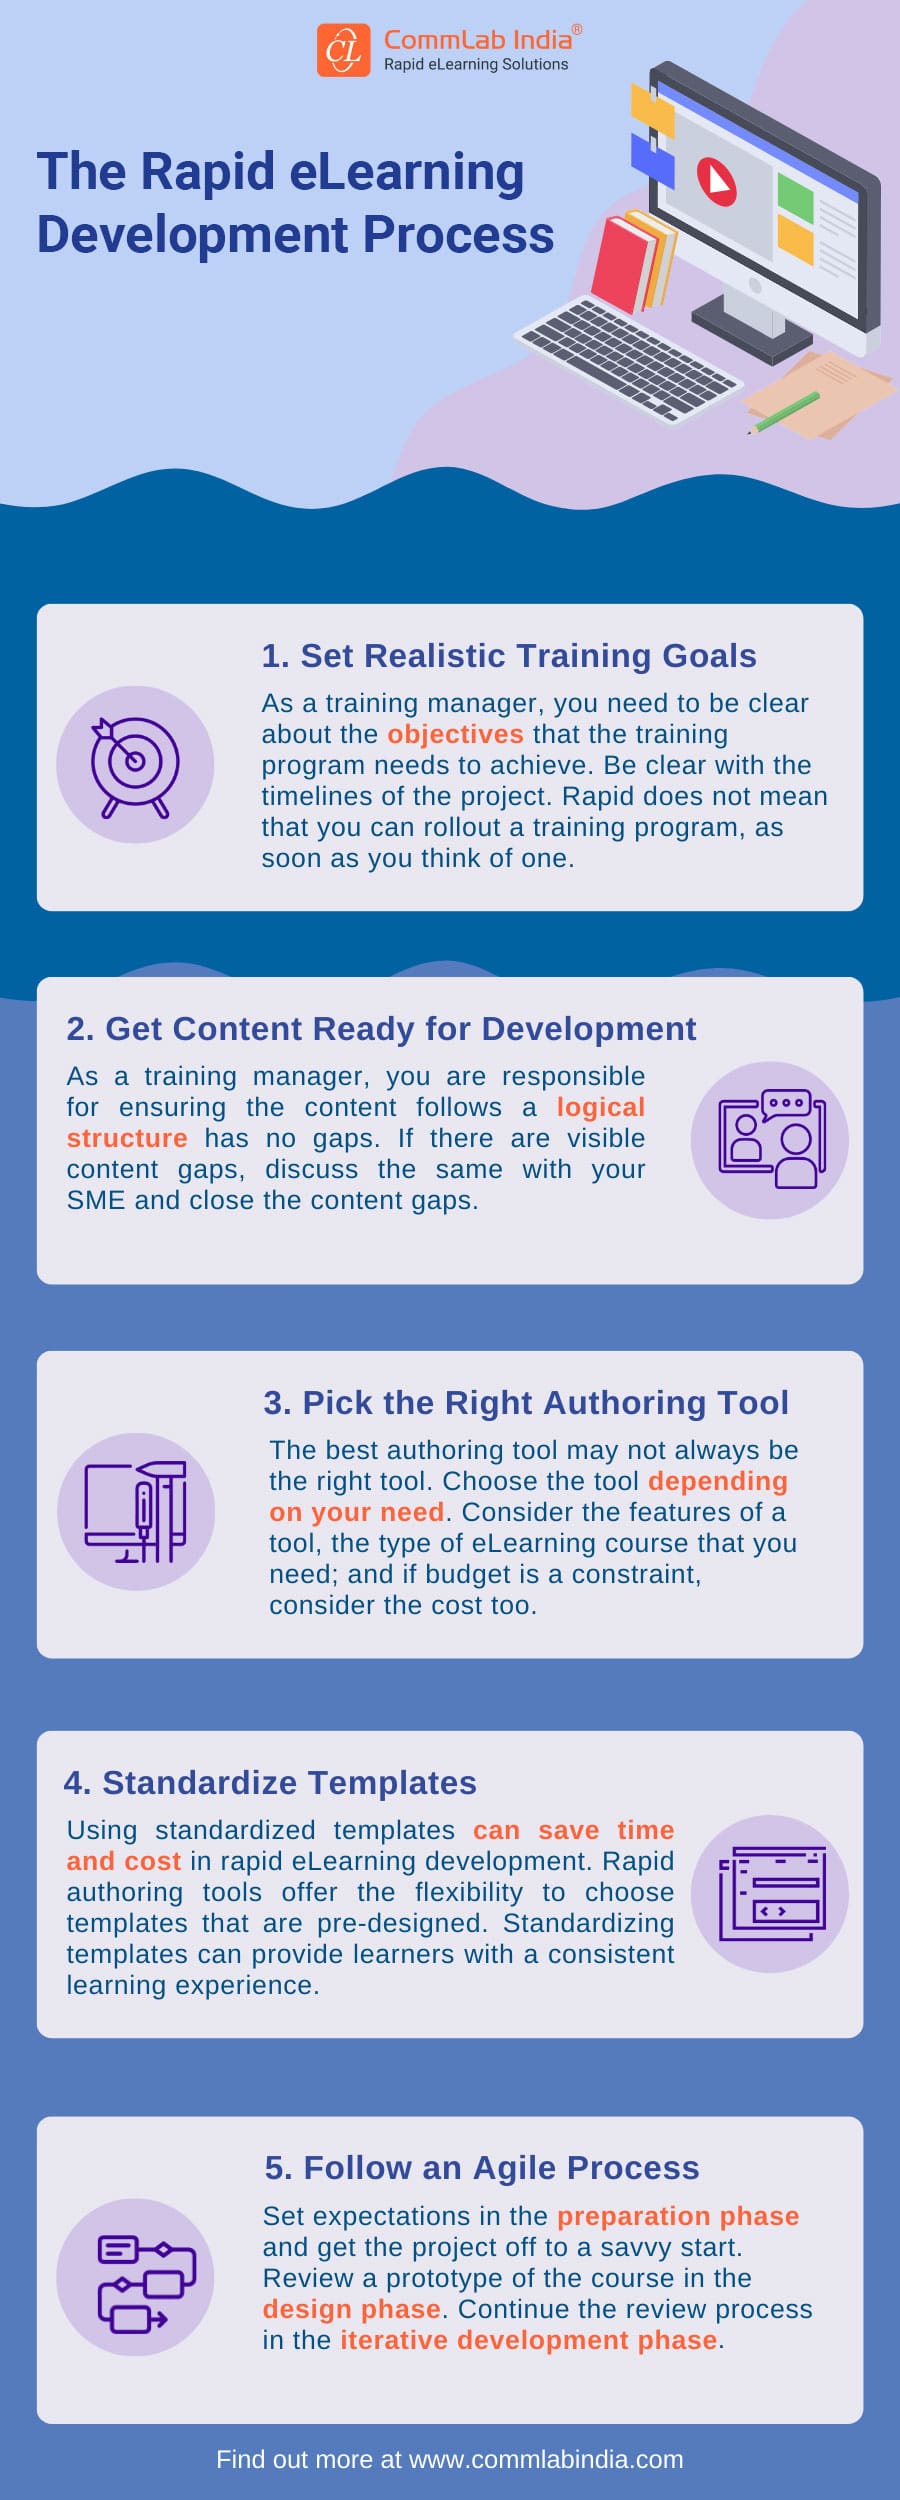 Rapid eLearning - The Development Process [Infographic]